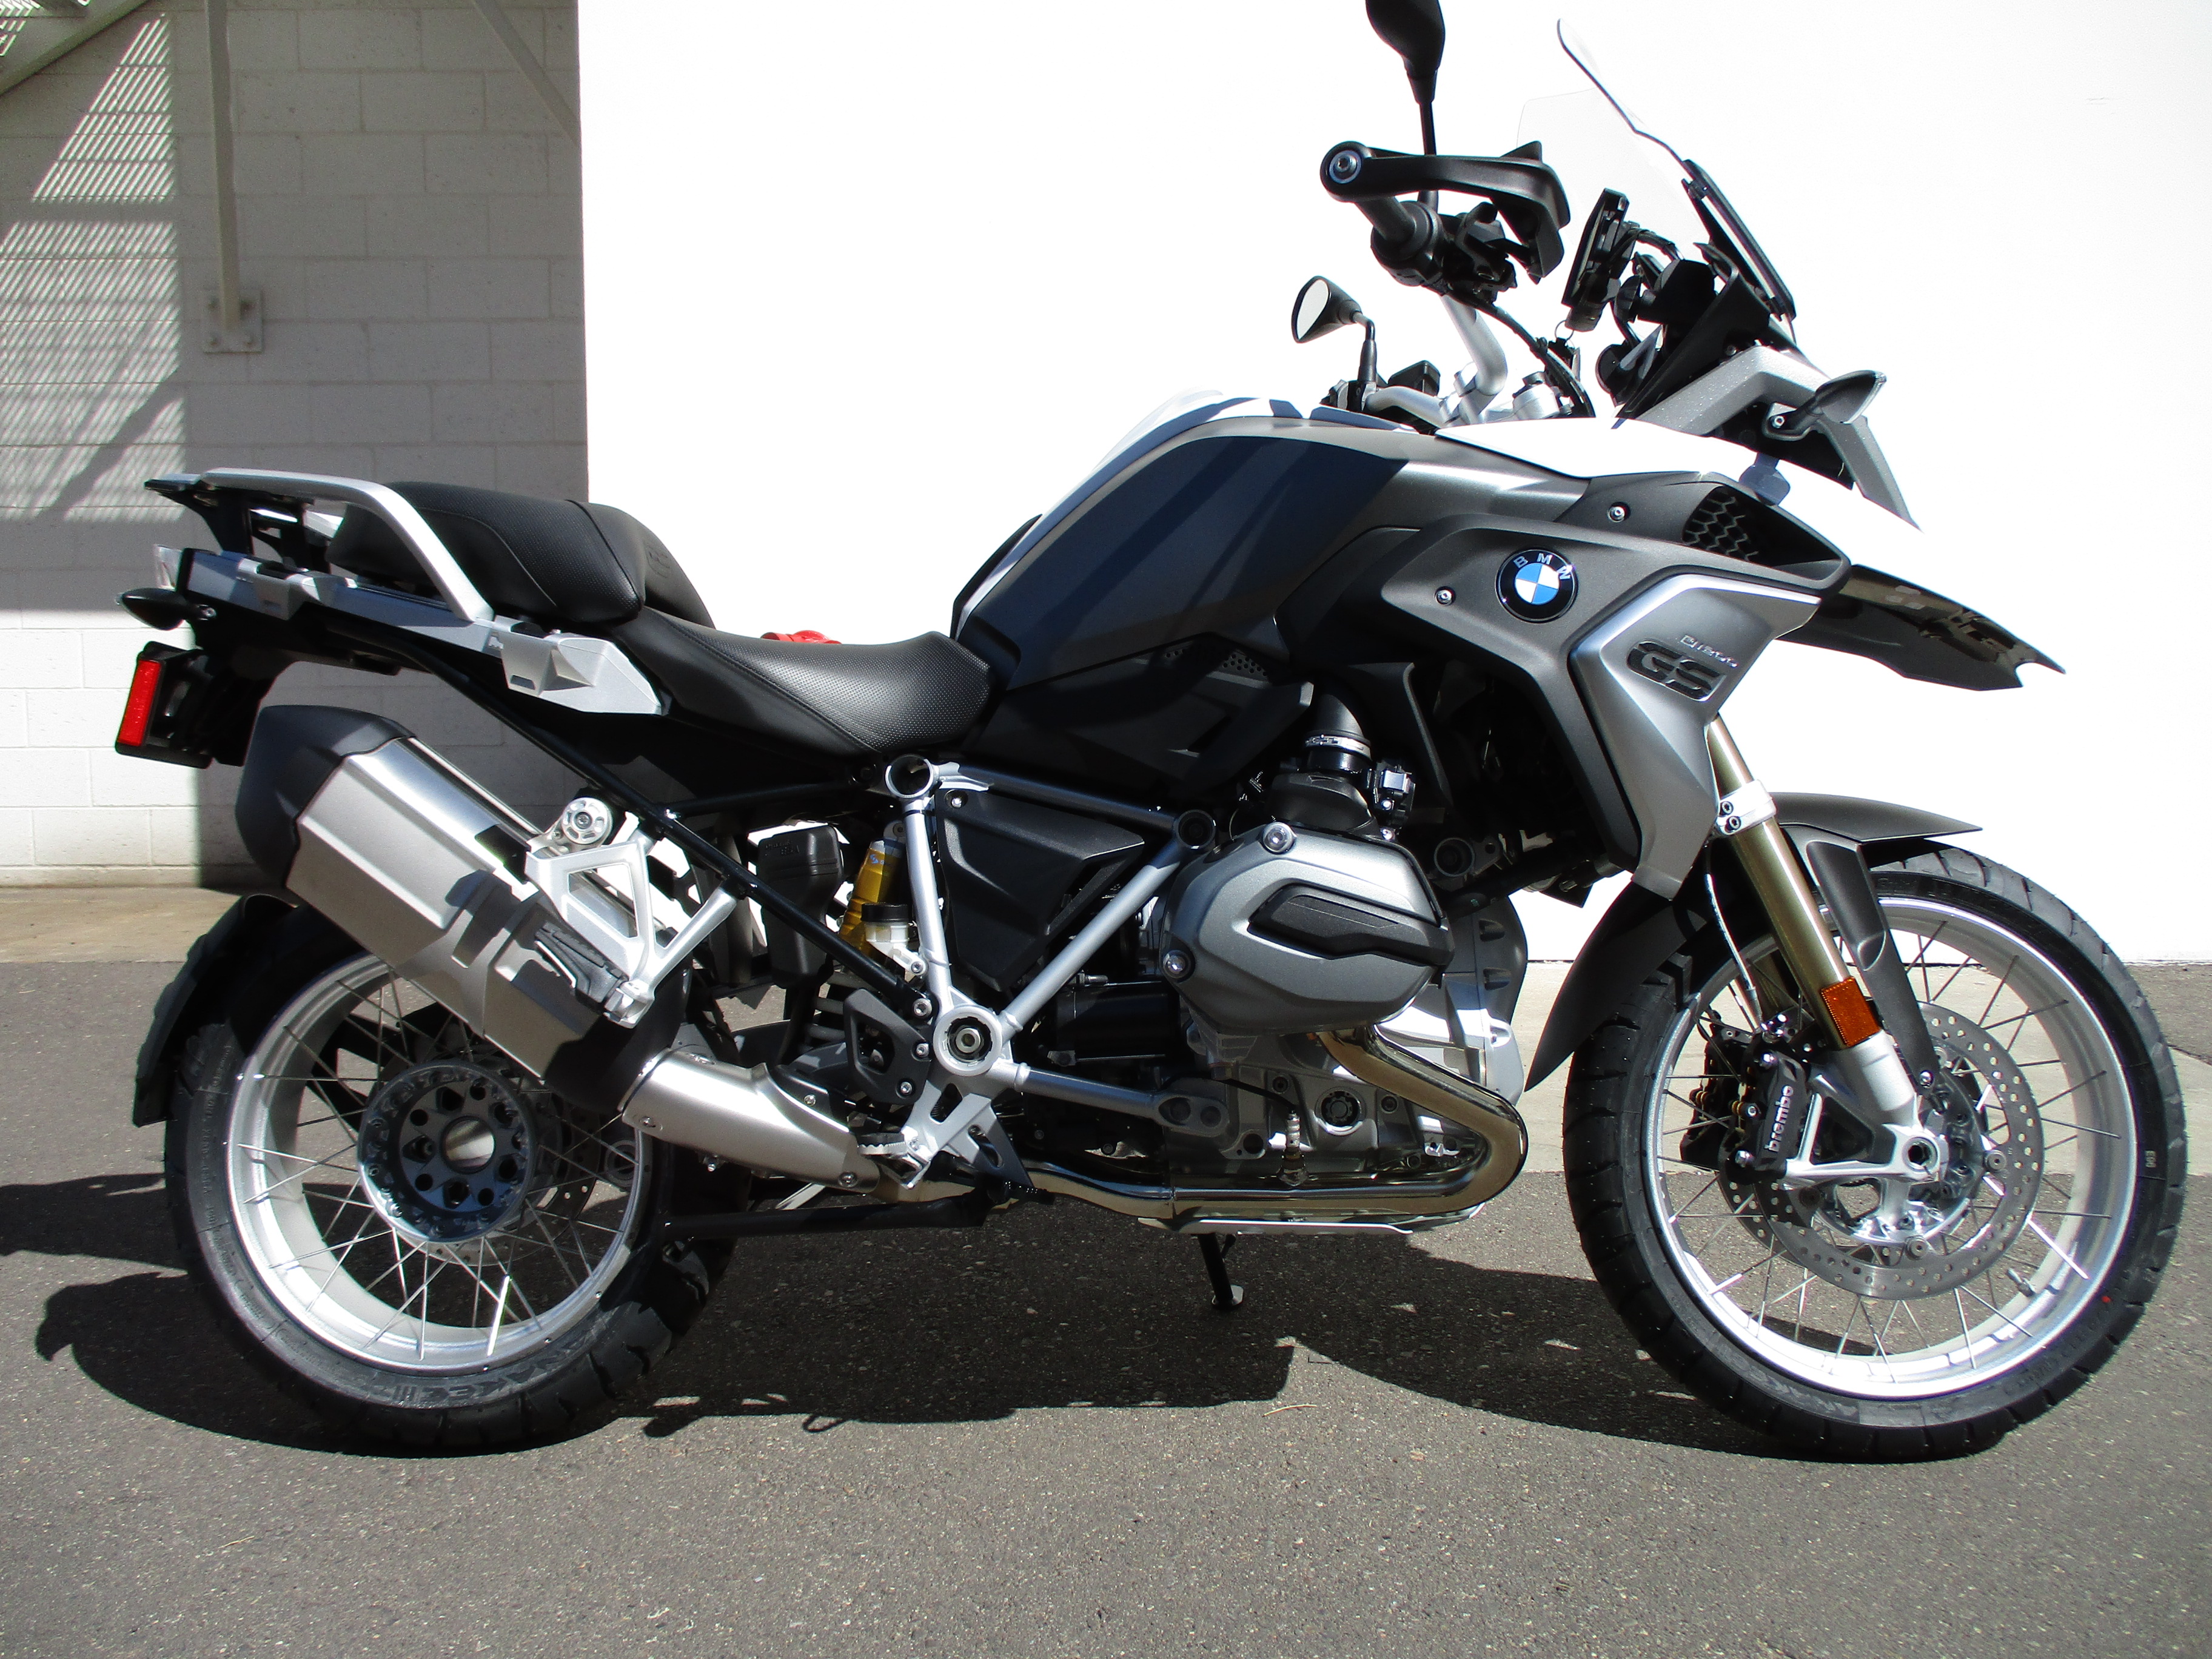 New Motorcycle Inventory - R1200GS - Sandia BMW Motorcycles